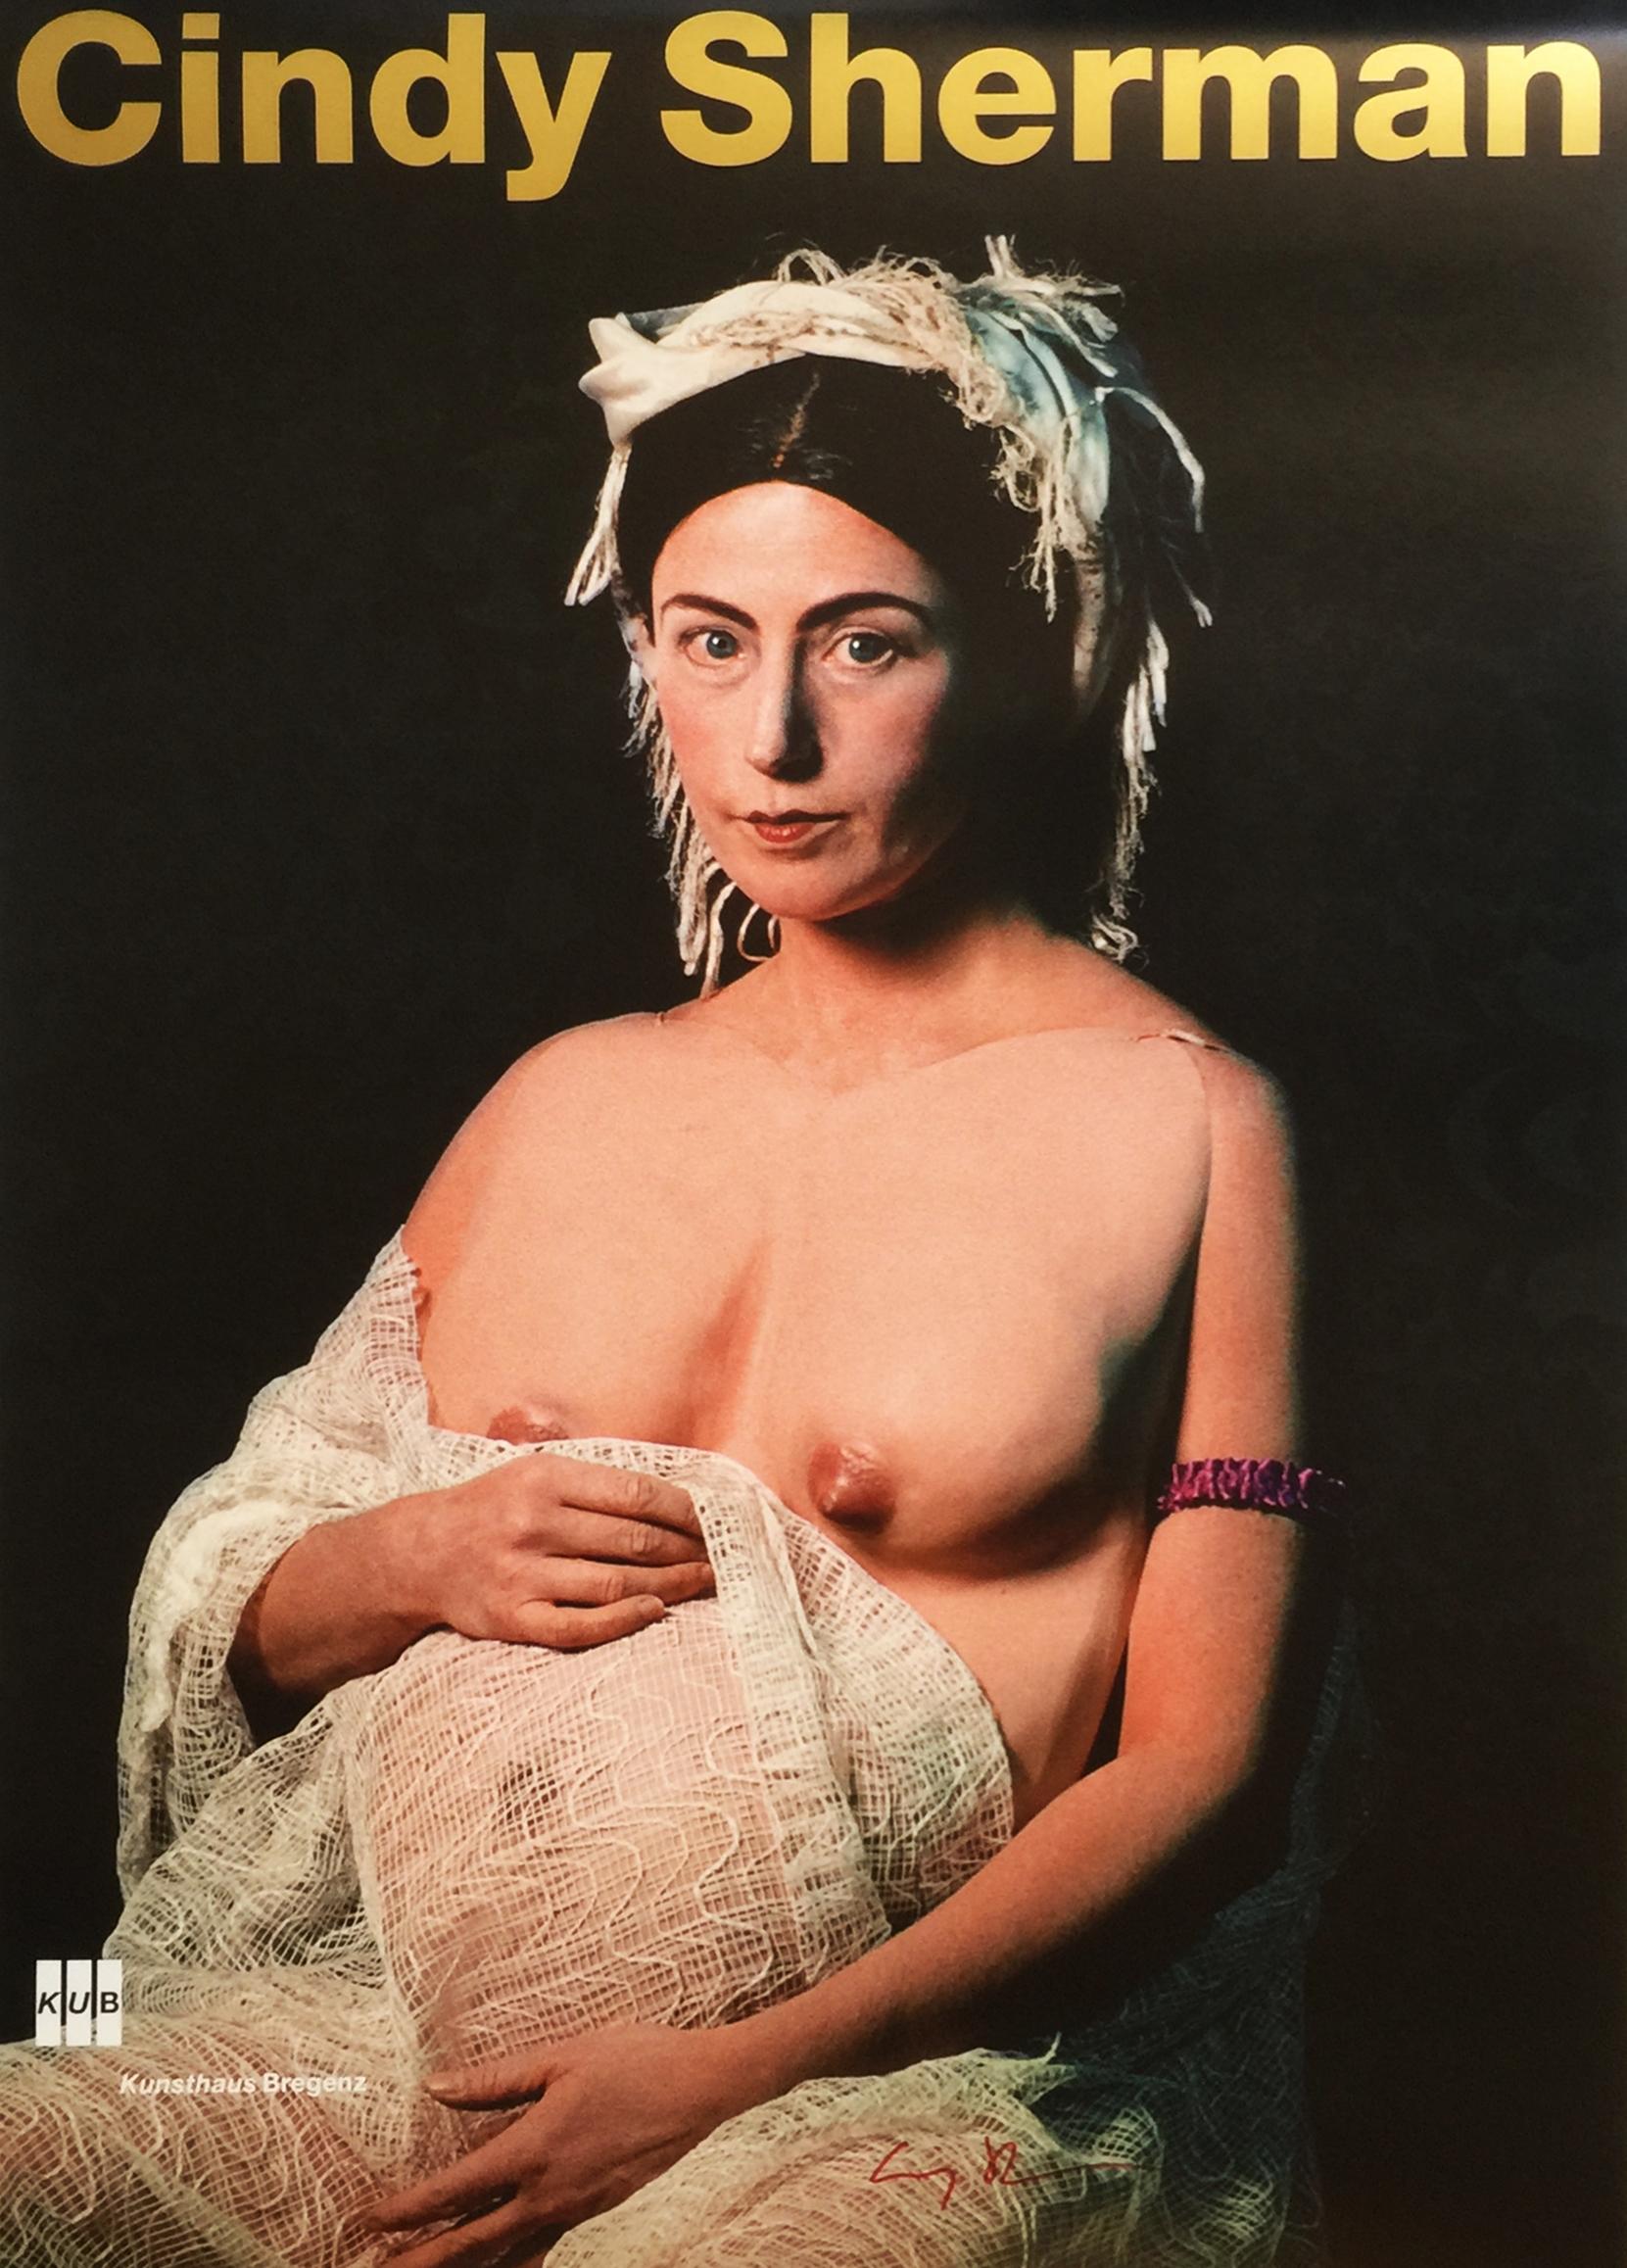 Cindy Sherman
Limited Edition Offset Lithograph on 200g Profisilk paper
33 × 23 1/4 inches
Edition of 200 
Limited Edition Offset Lithograph on 200g Profisilk paper
Hand signed in red marker on the front.  Unnumbered from the limited edition of